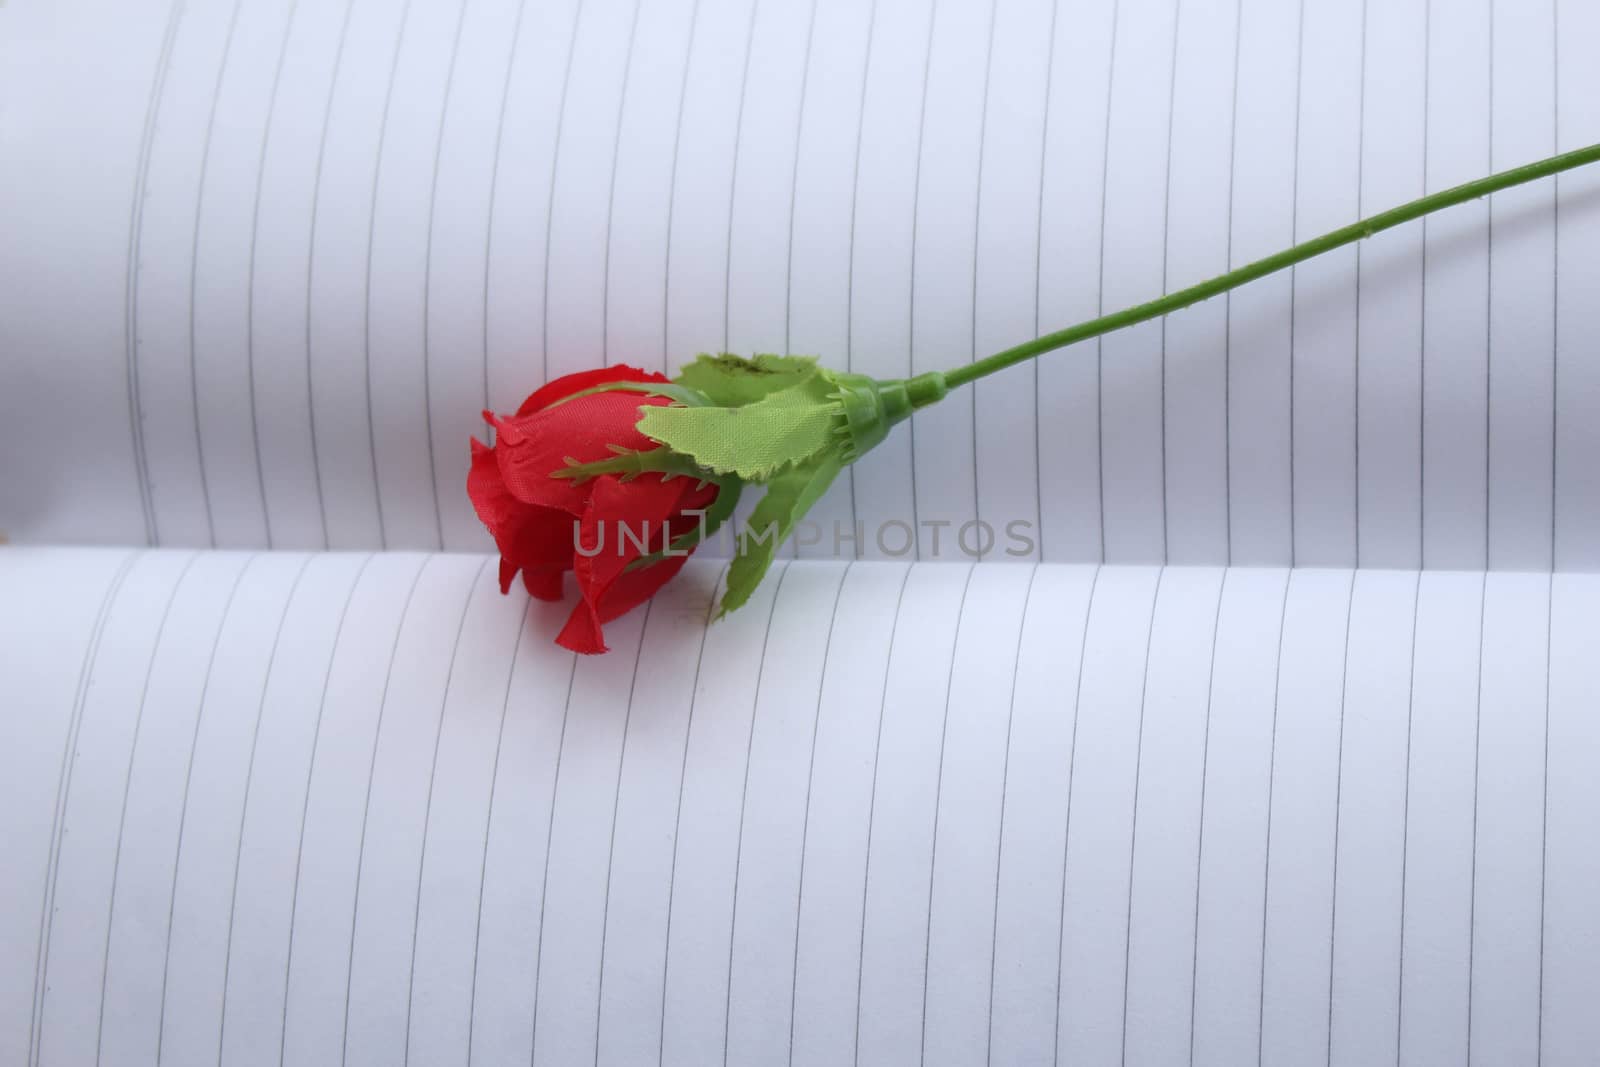 The plastic rose is on the notebook.It is the red rose and the notebook is empty.